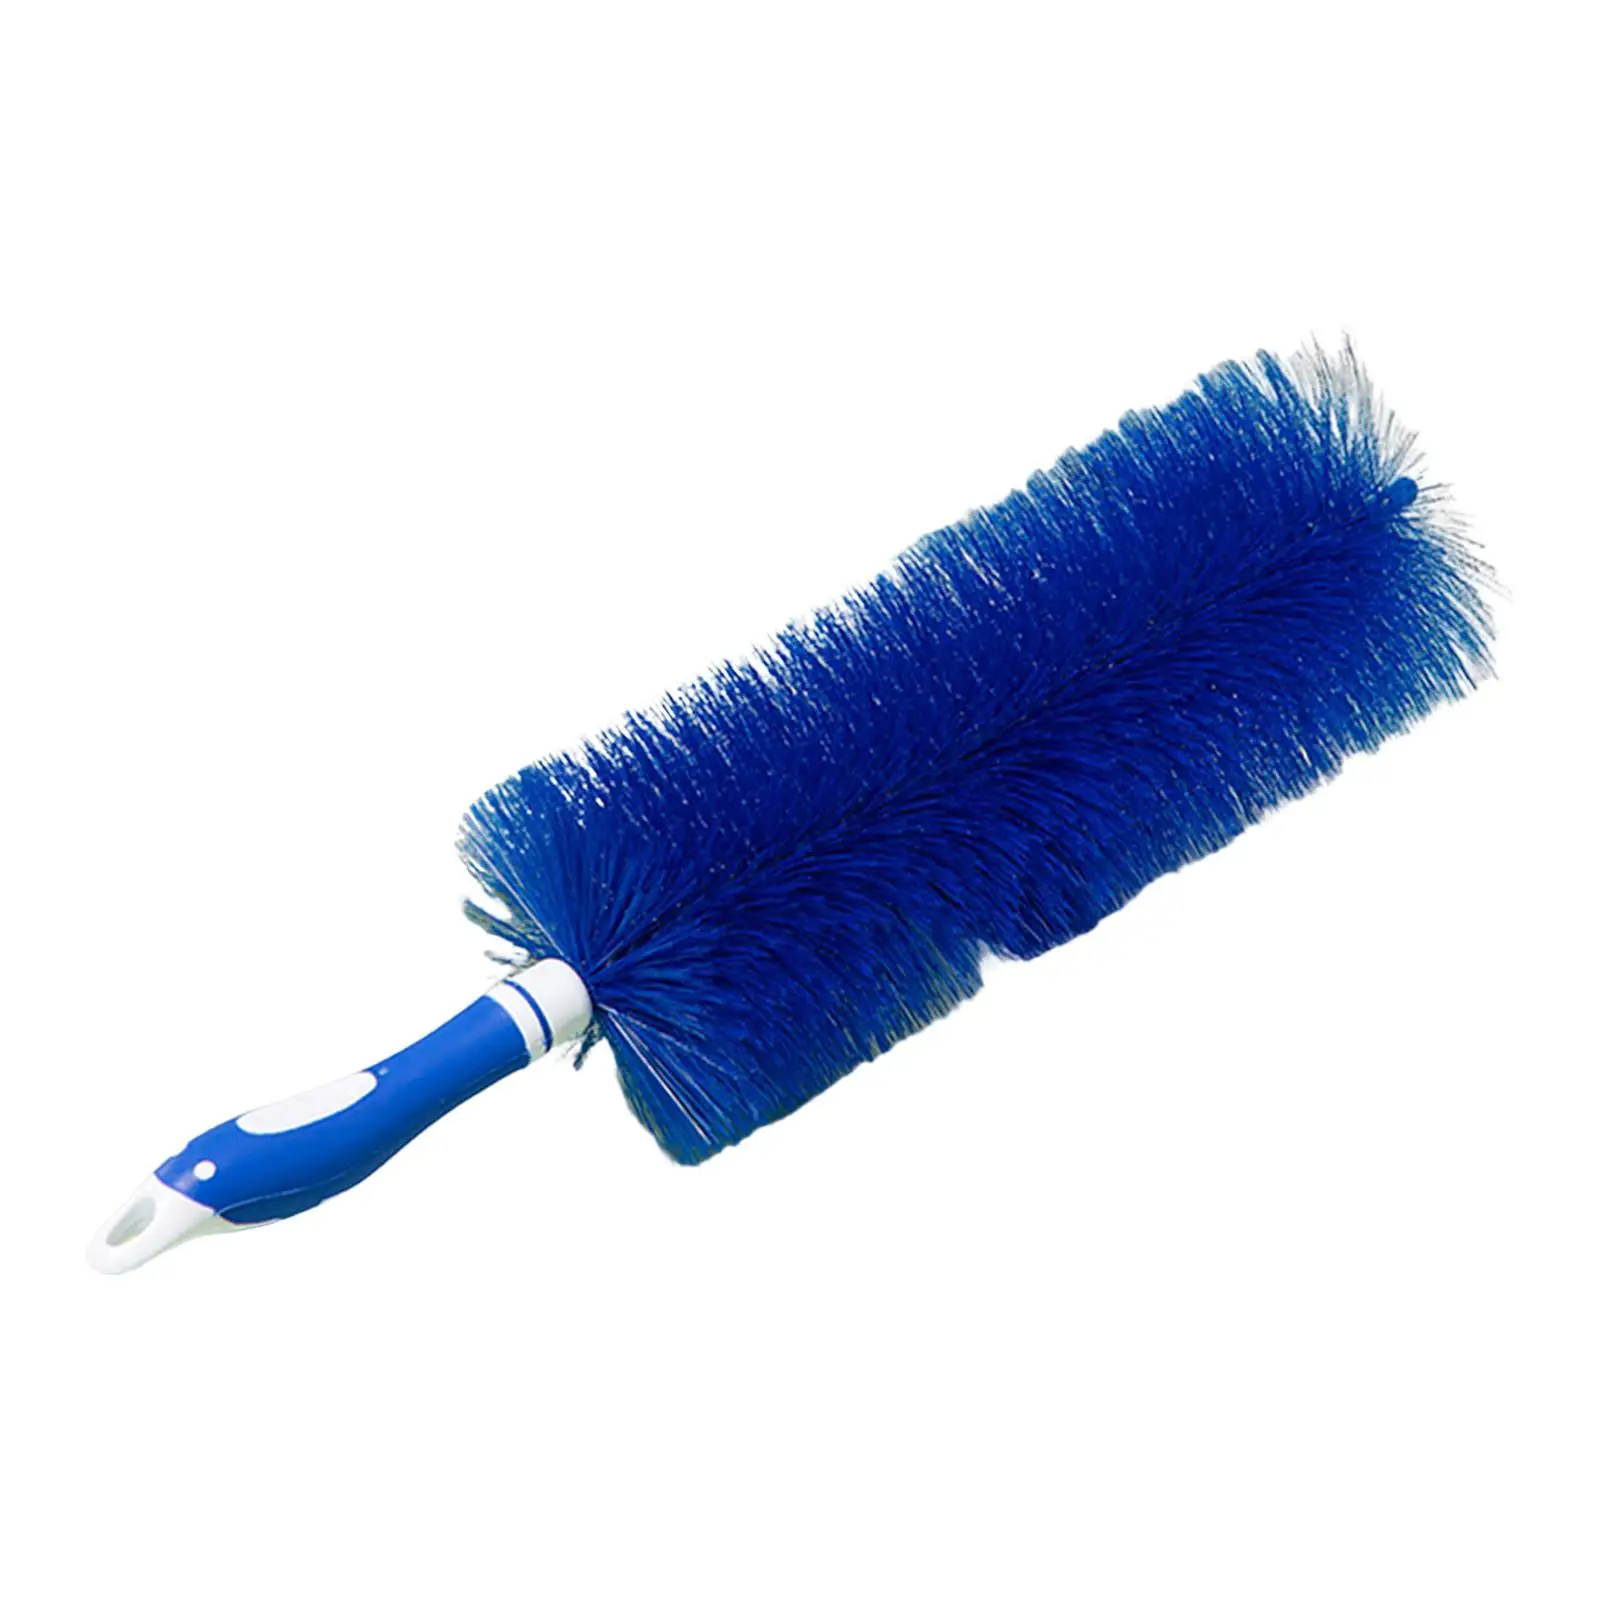 Dust Cleaning Brush Portable Cleaning Duster for Ceiling Fan Window Computer